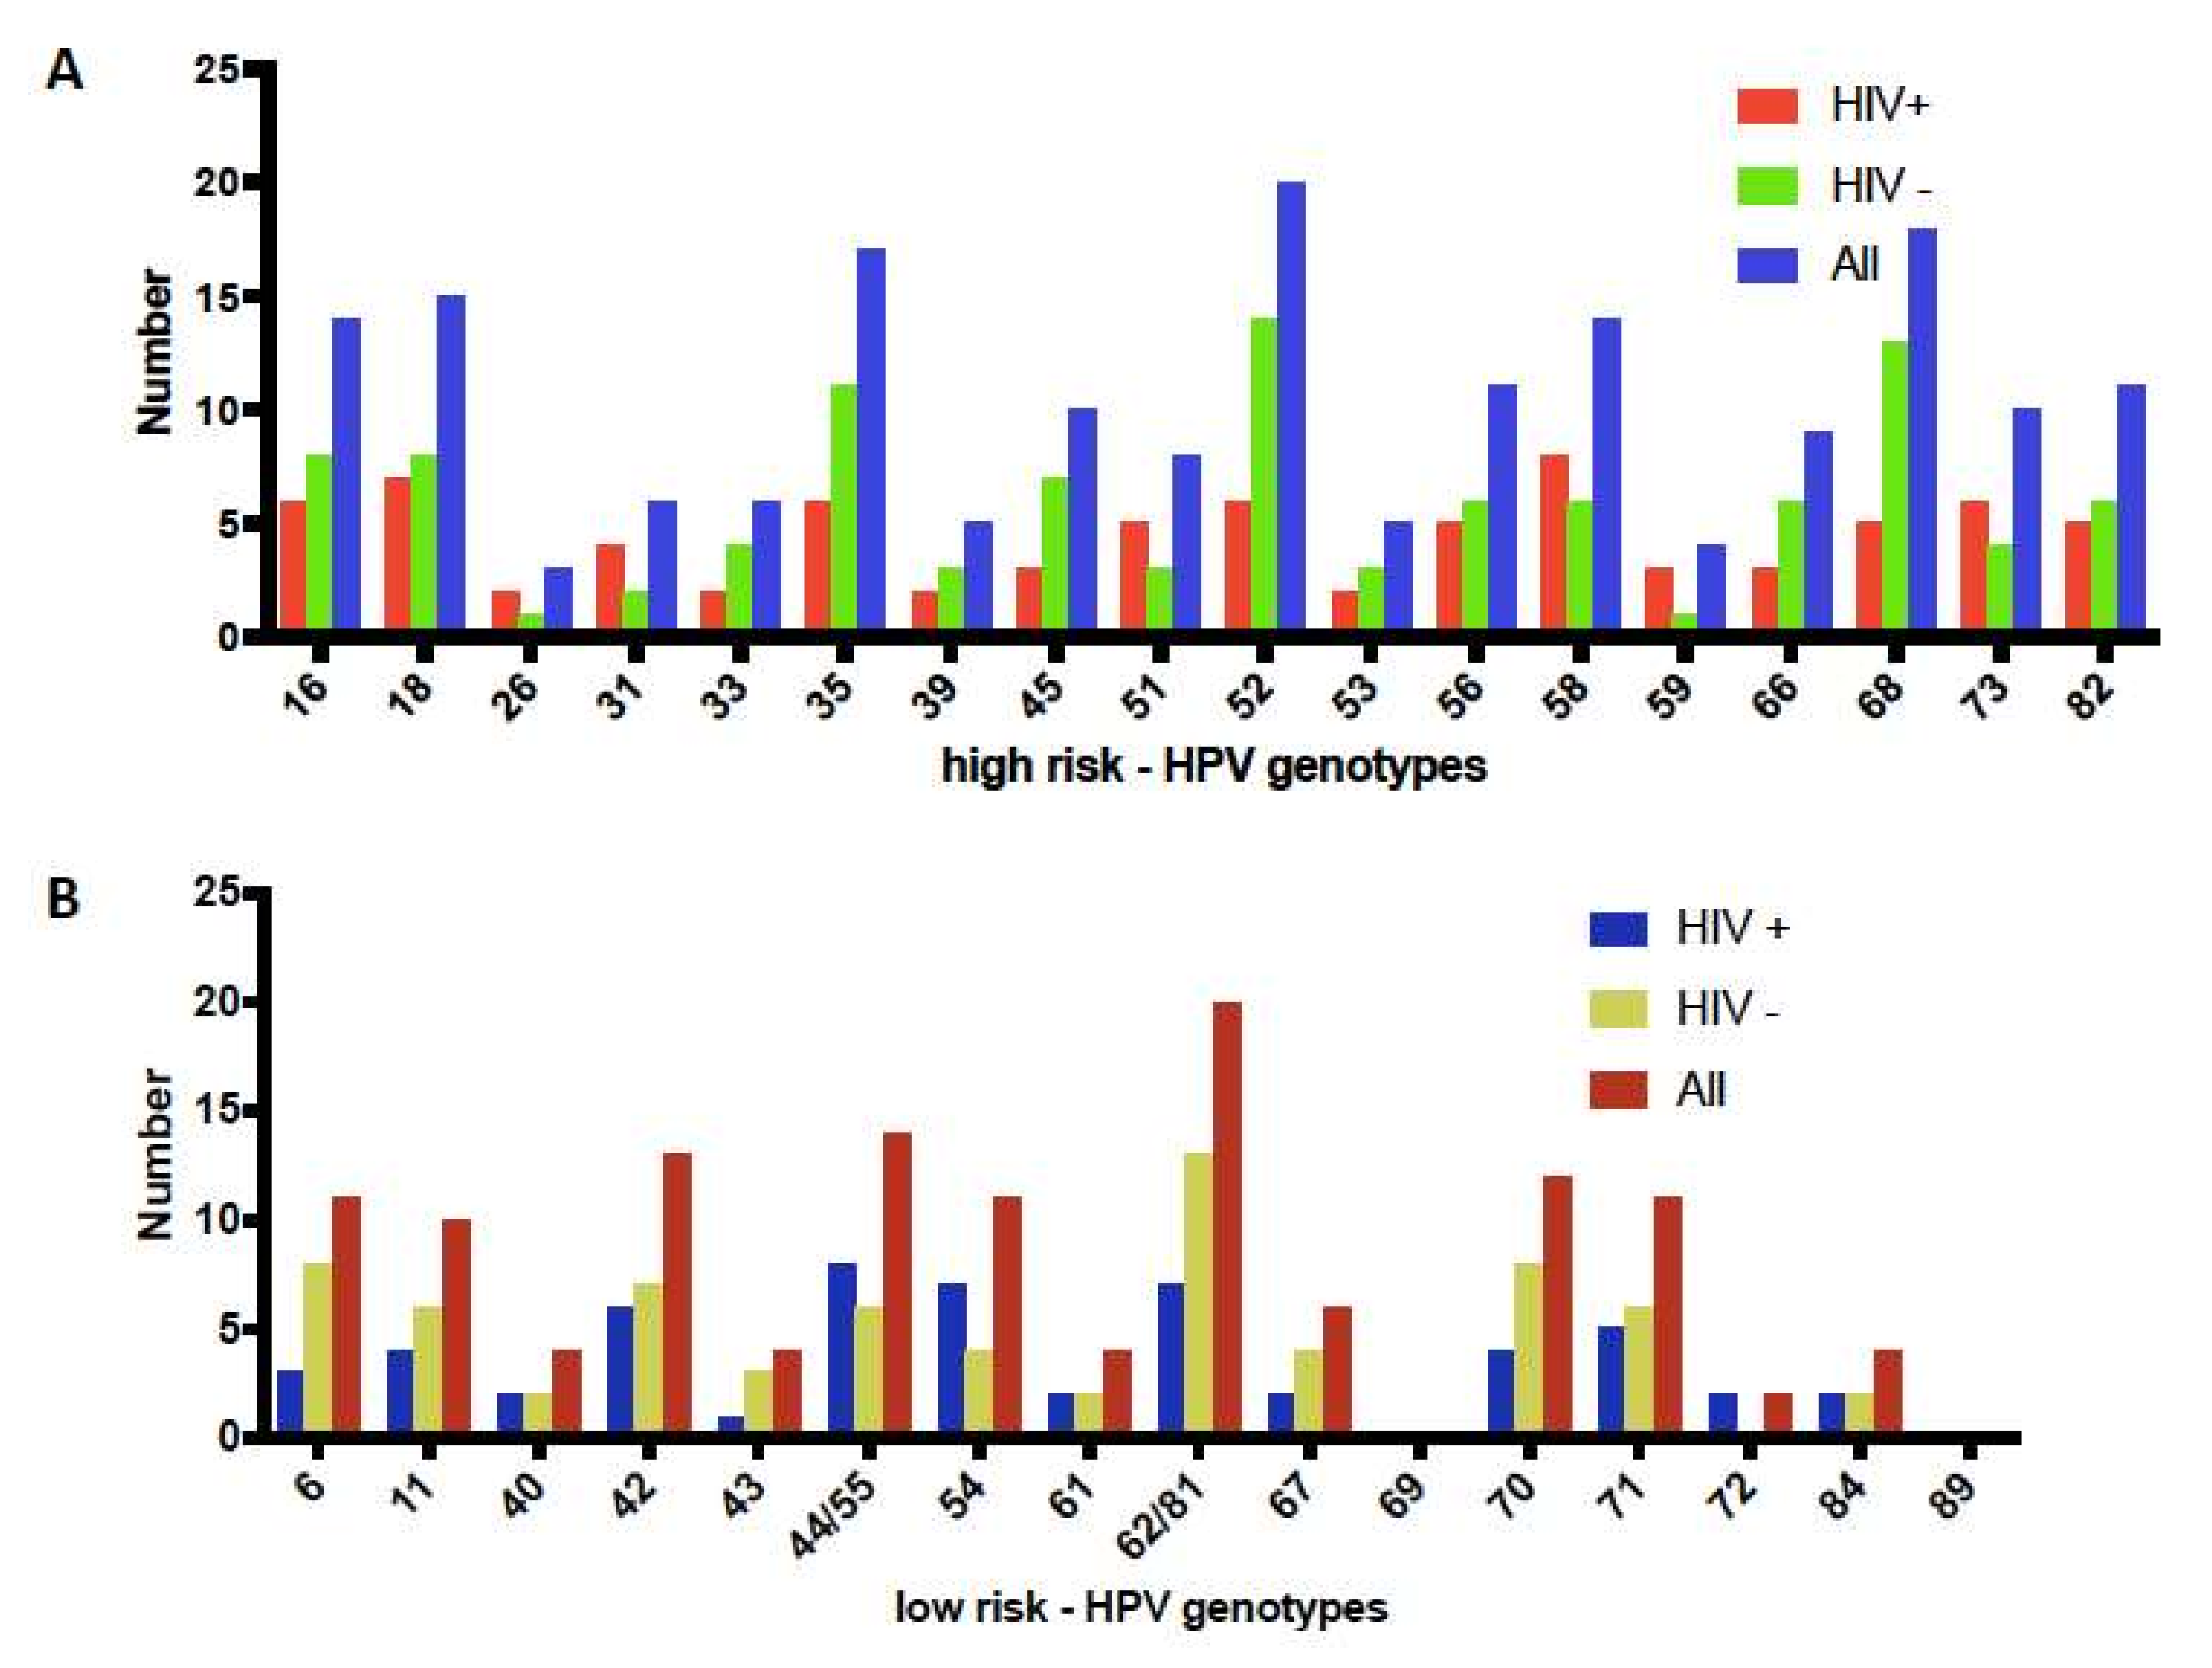 Viruses Free Full-Text Identification of the Human Papillomavirus Genotypes, According to the Human Immunodeficiency Virus Status in a Cohort of Women from Maputo, Mozambique